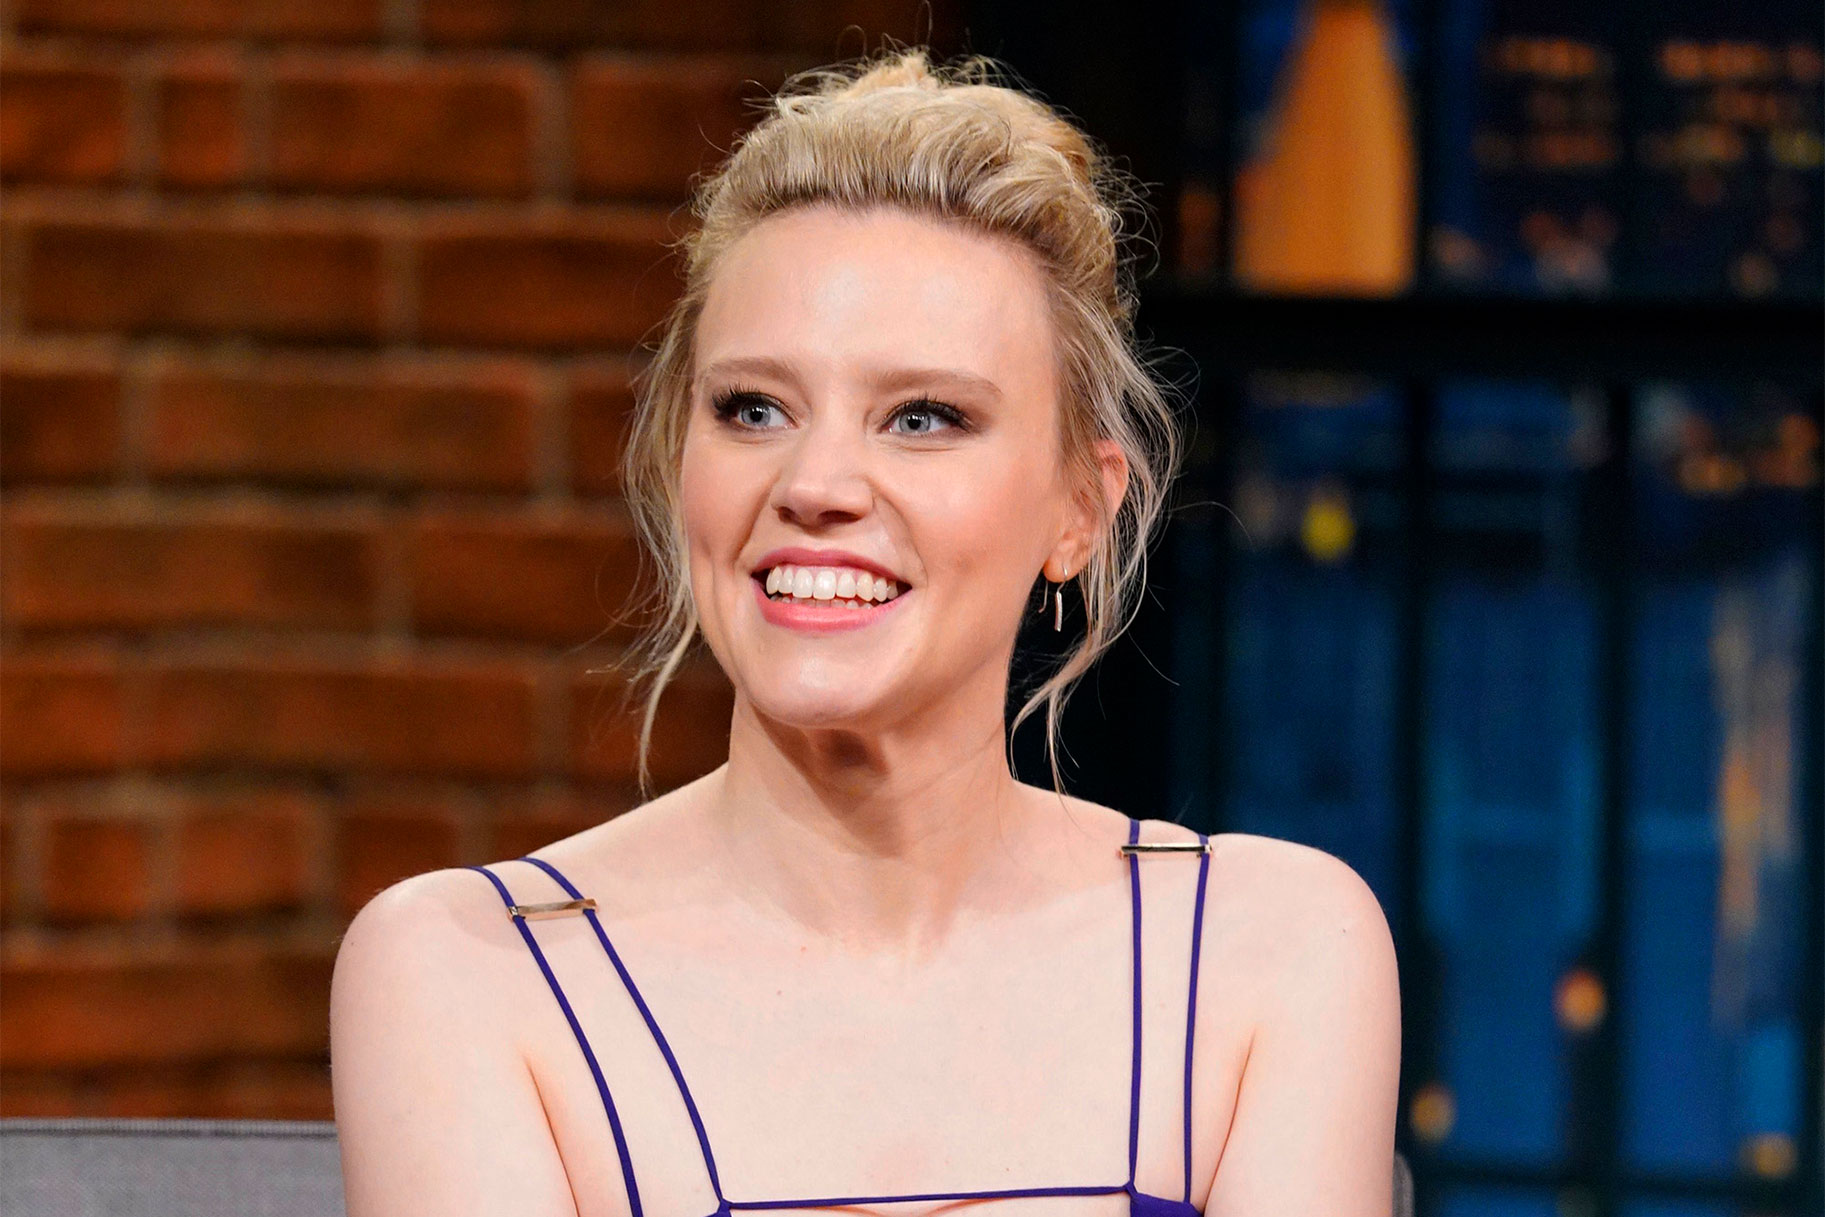 Kate McKinnon Opens Up About Why She Decided to Leave SNL